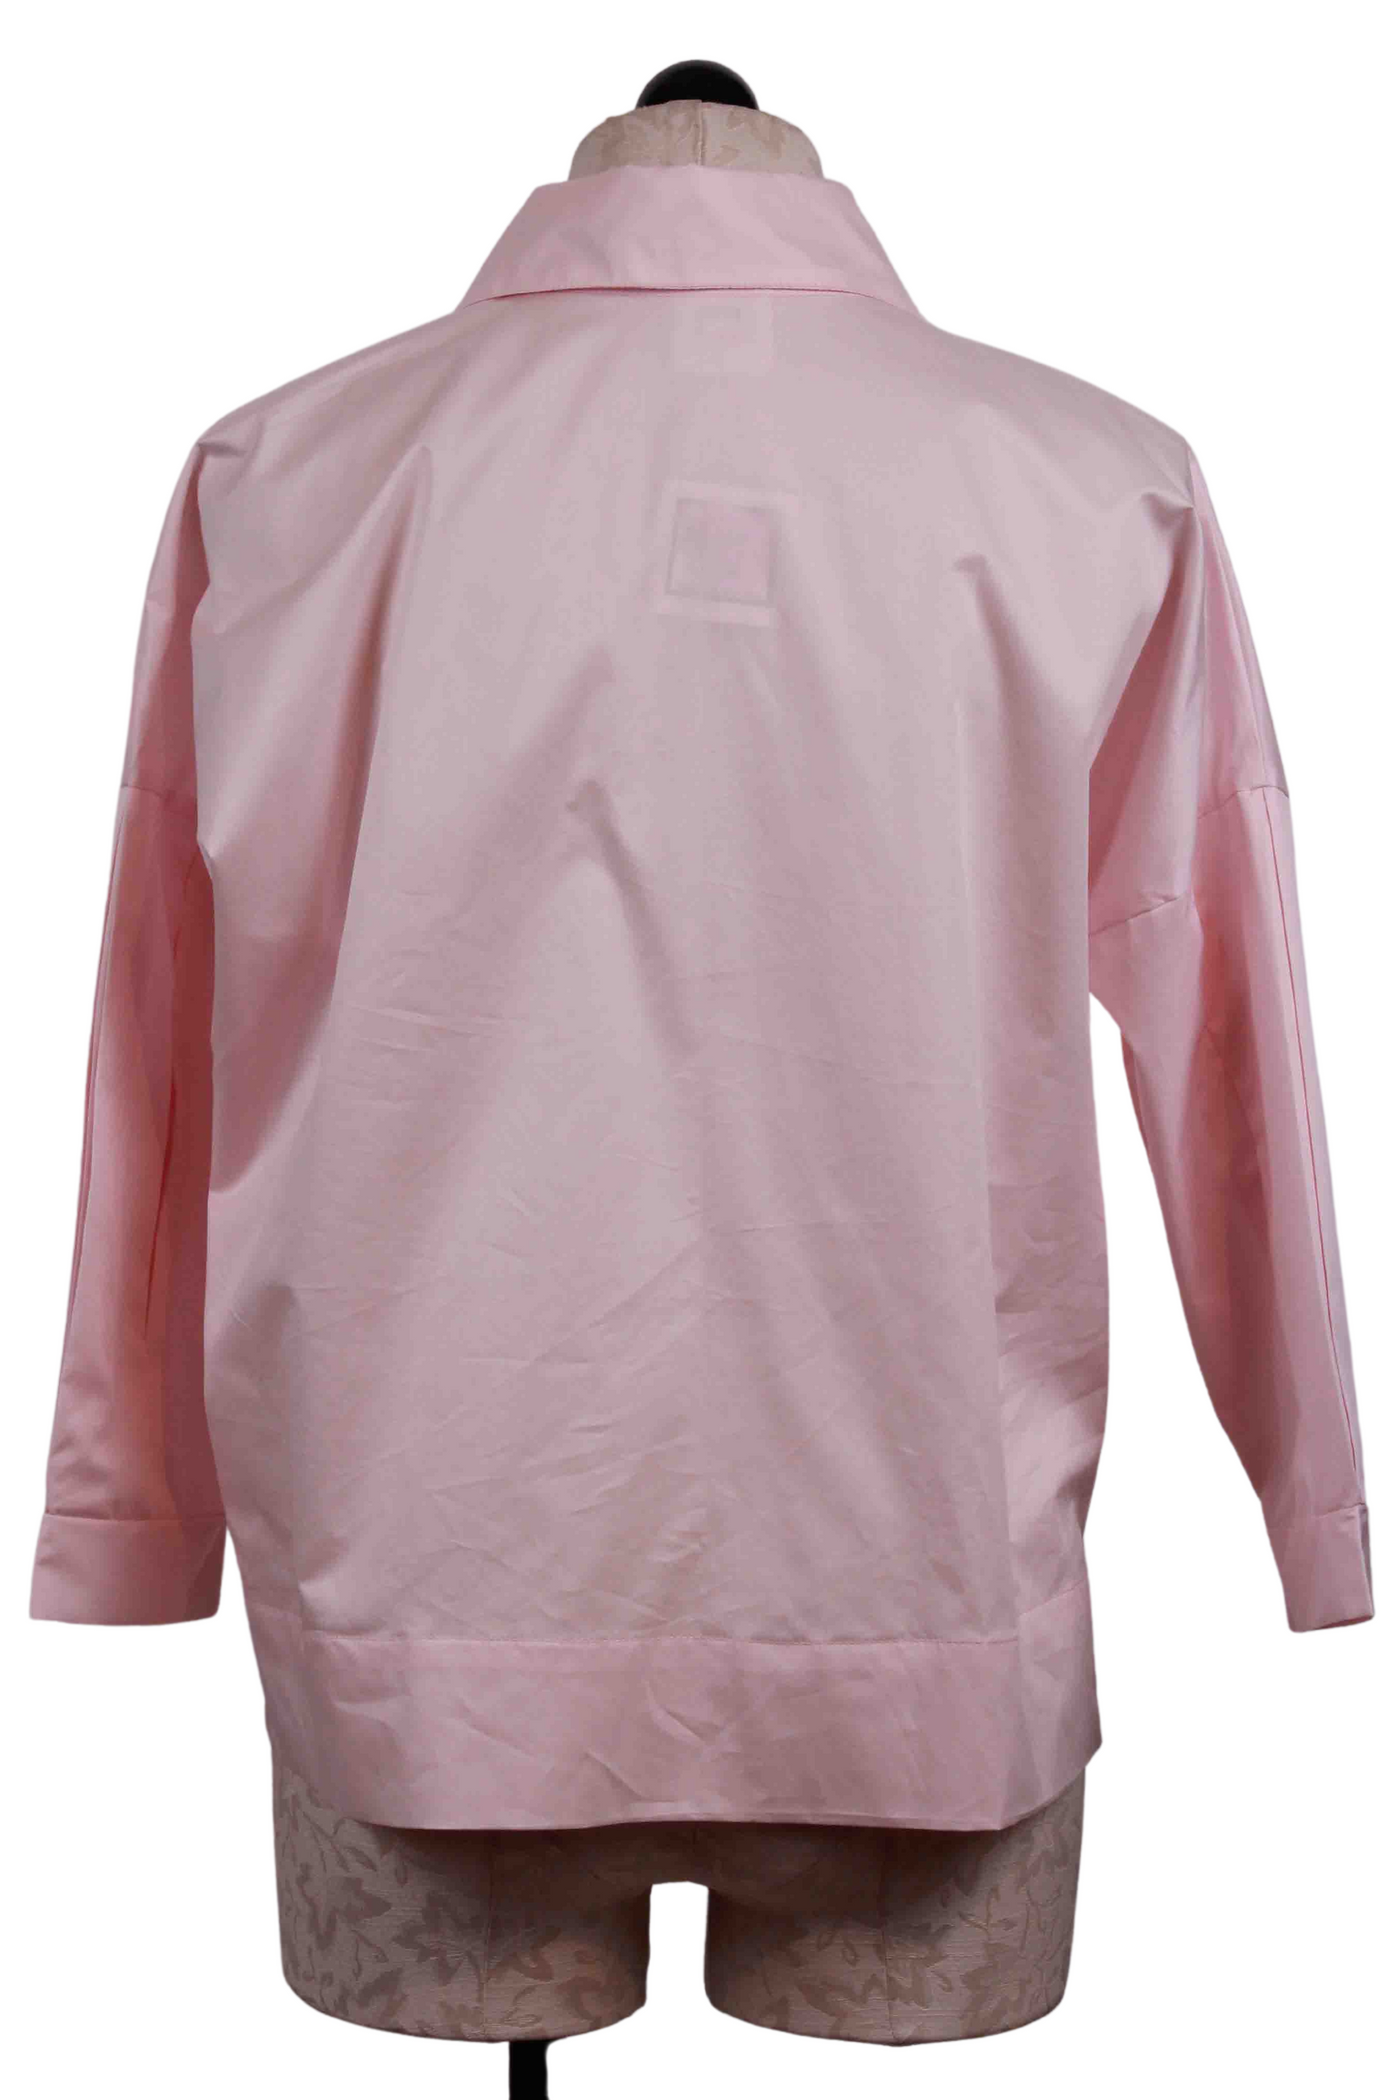 back view of Pinkish Pleat Sleeve Button Up Blouse Shirt by Planet